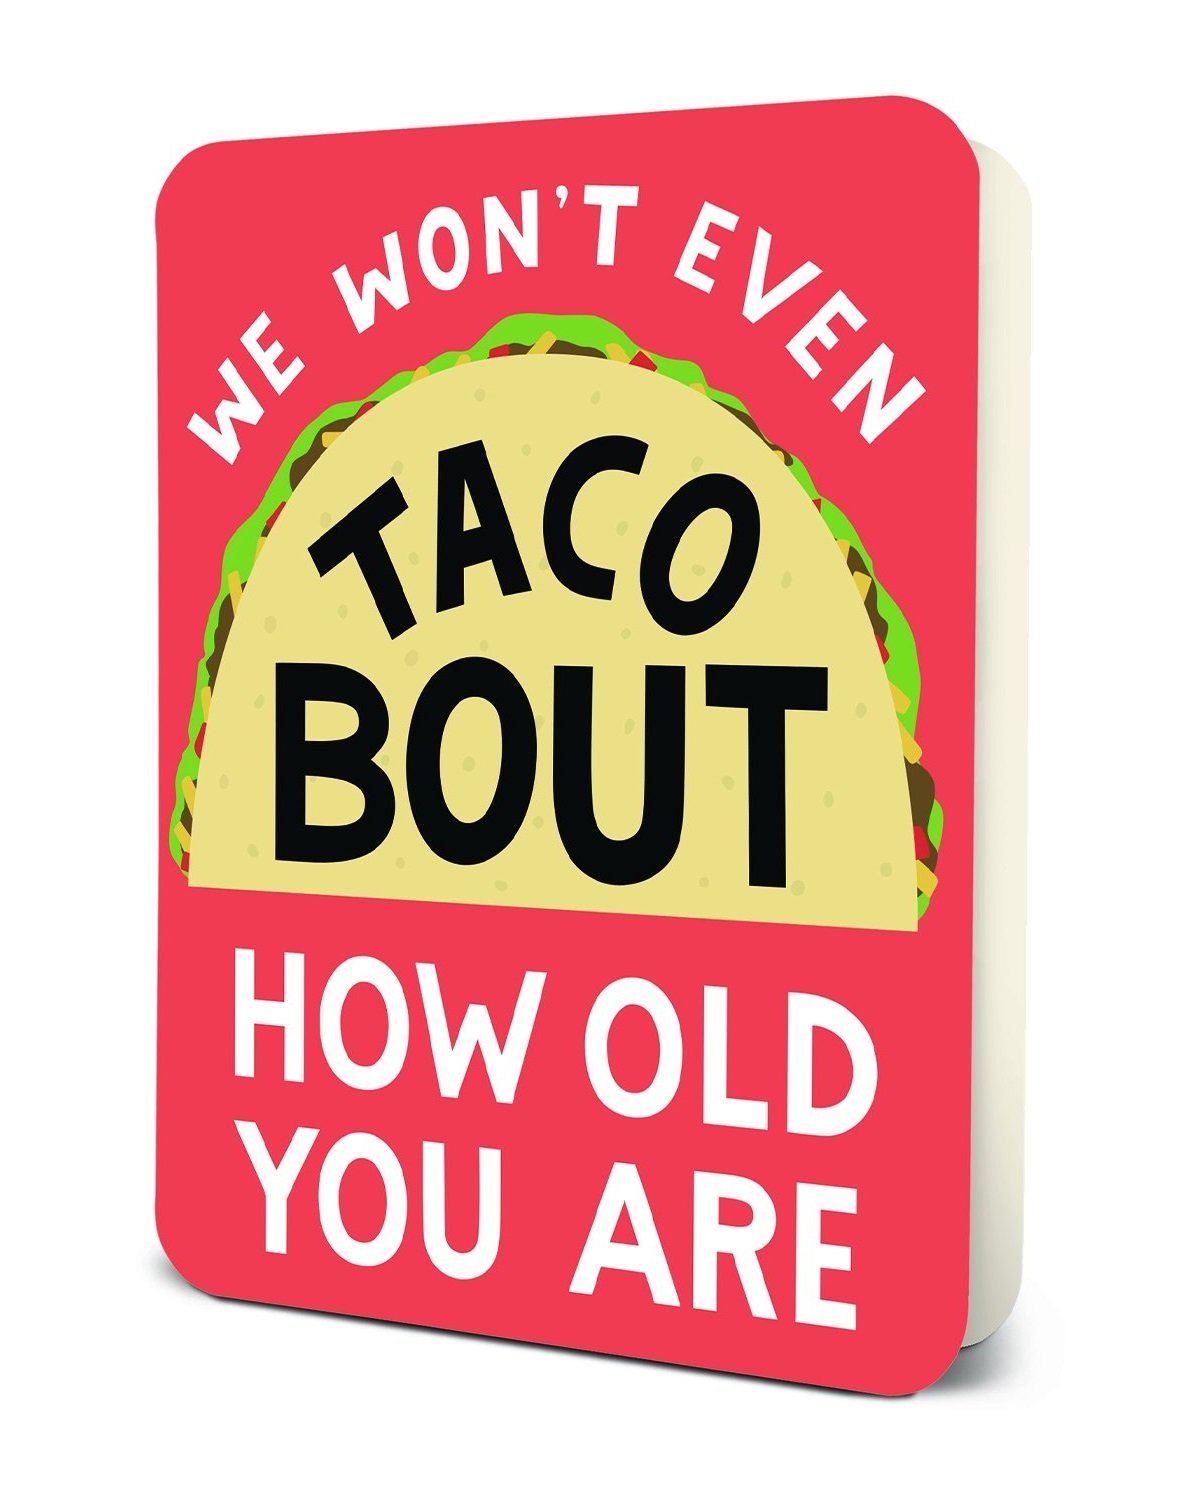 We Won't Even Taco Bout How Old You Are - Greeting Card Greeting Card Orange Circle Studio